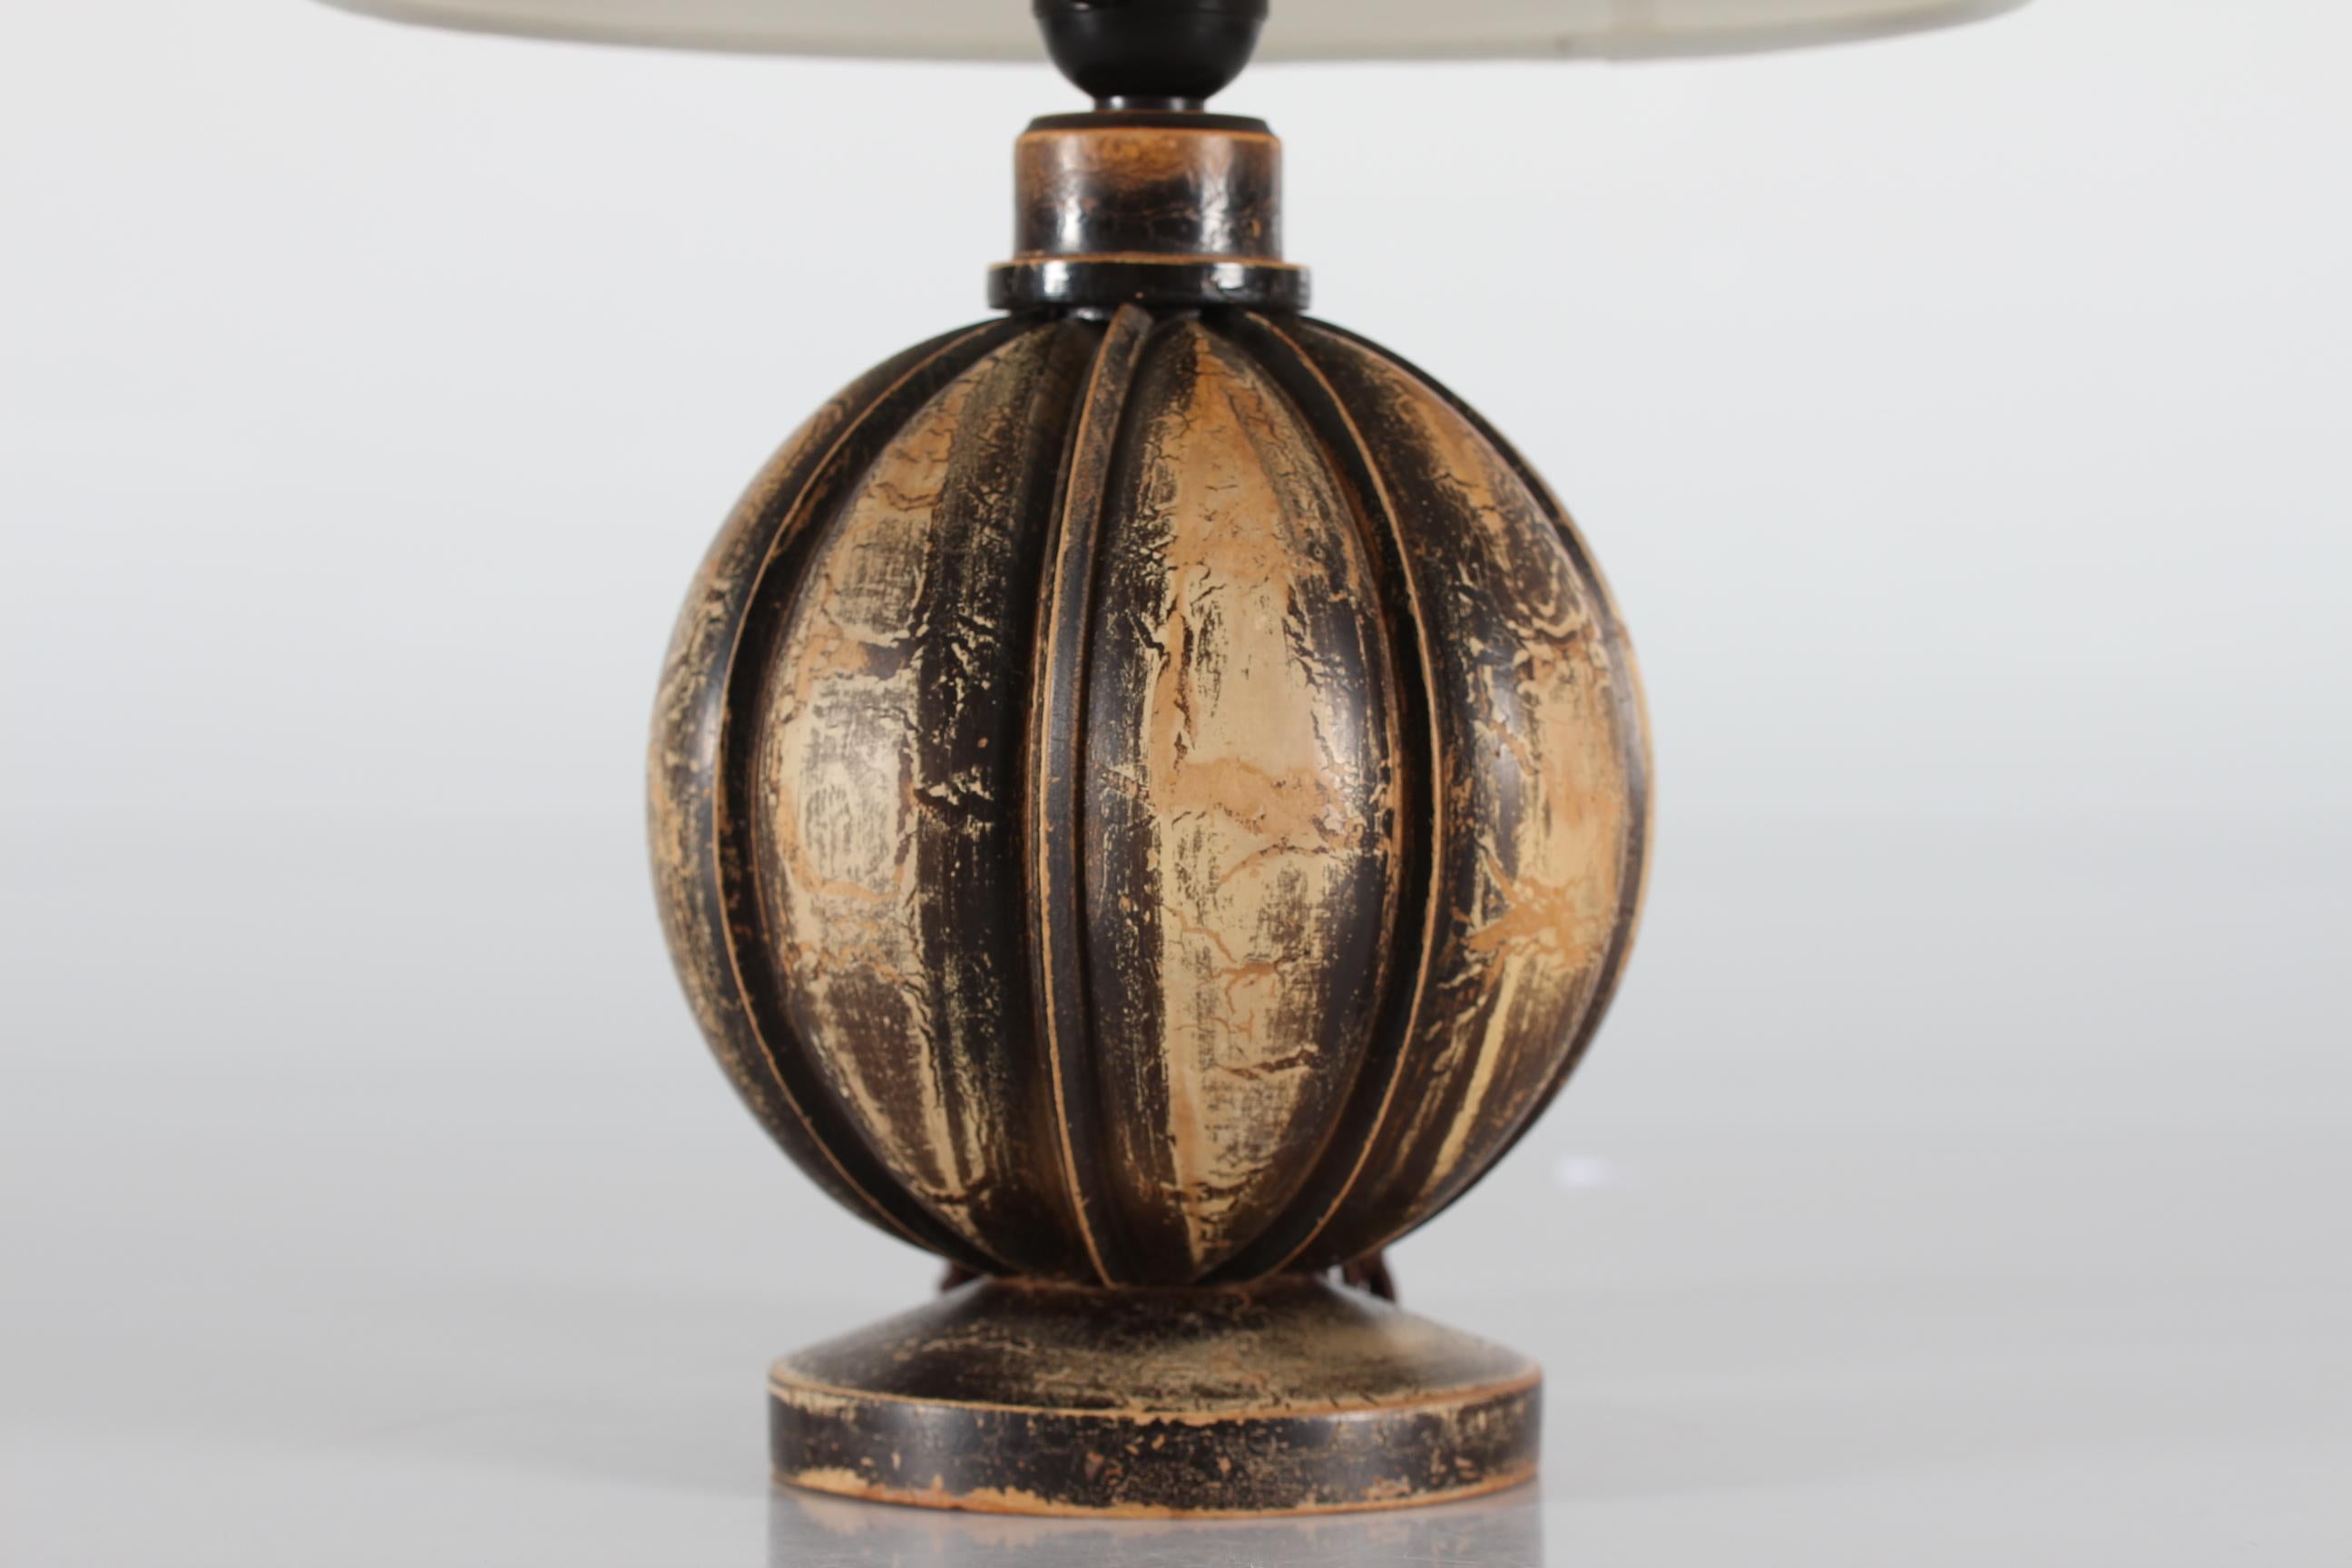 Danish melon/pumpkin shaped Art Deco table lamp from 1940s.
It is of carved wood with marbled and patinated paint.

Included is a new lamp shade designed and made in Denmark. It is made of woven fabric with some texture and it is natural white.